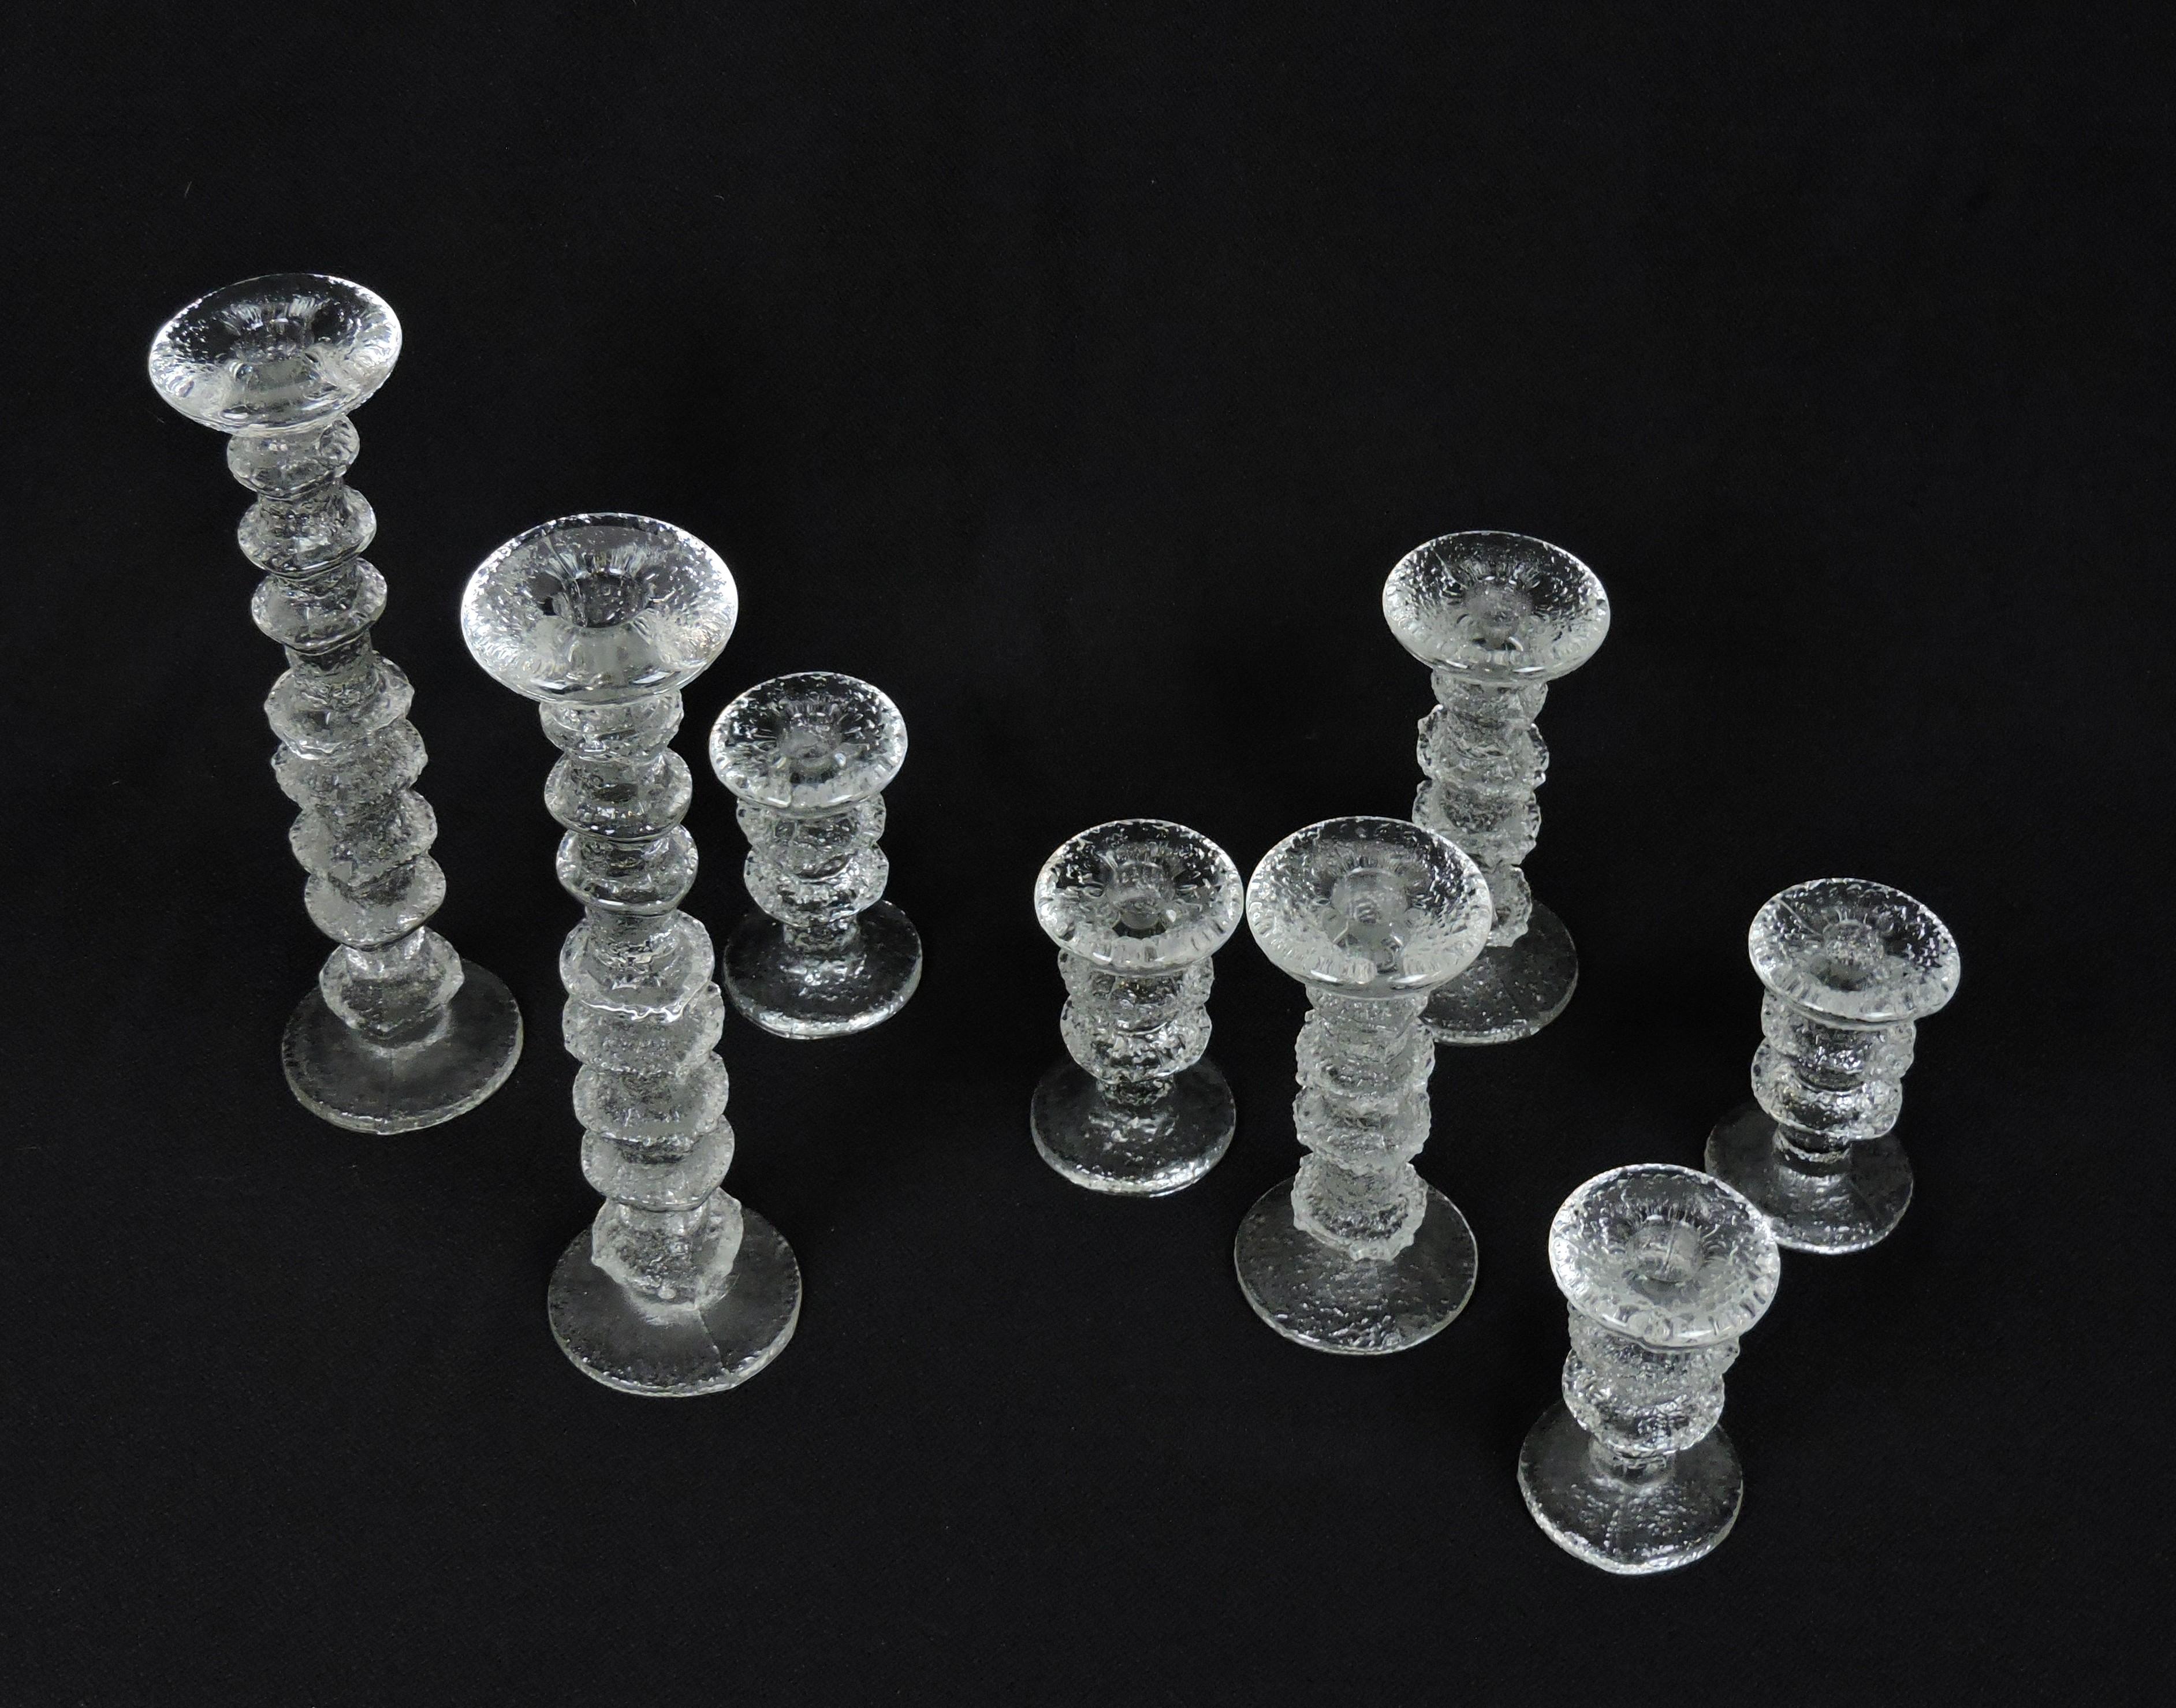 Beautiful set of 8 Festivo glass candlesticks designed by Timo Sarpaneva and manufactured in Finland by Iittala. This set includes two 12 5/8 inch tall (8 rings), two 7 1/8 inch tall (4 rings), and four 4 3/4 inch tall (2rings) candle holders.